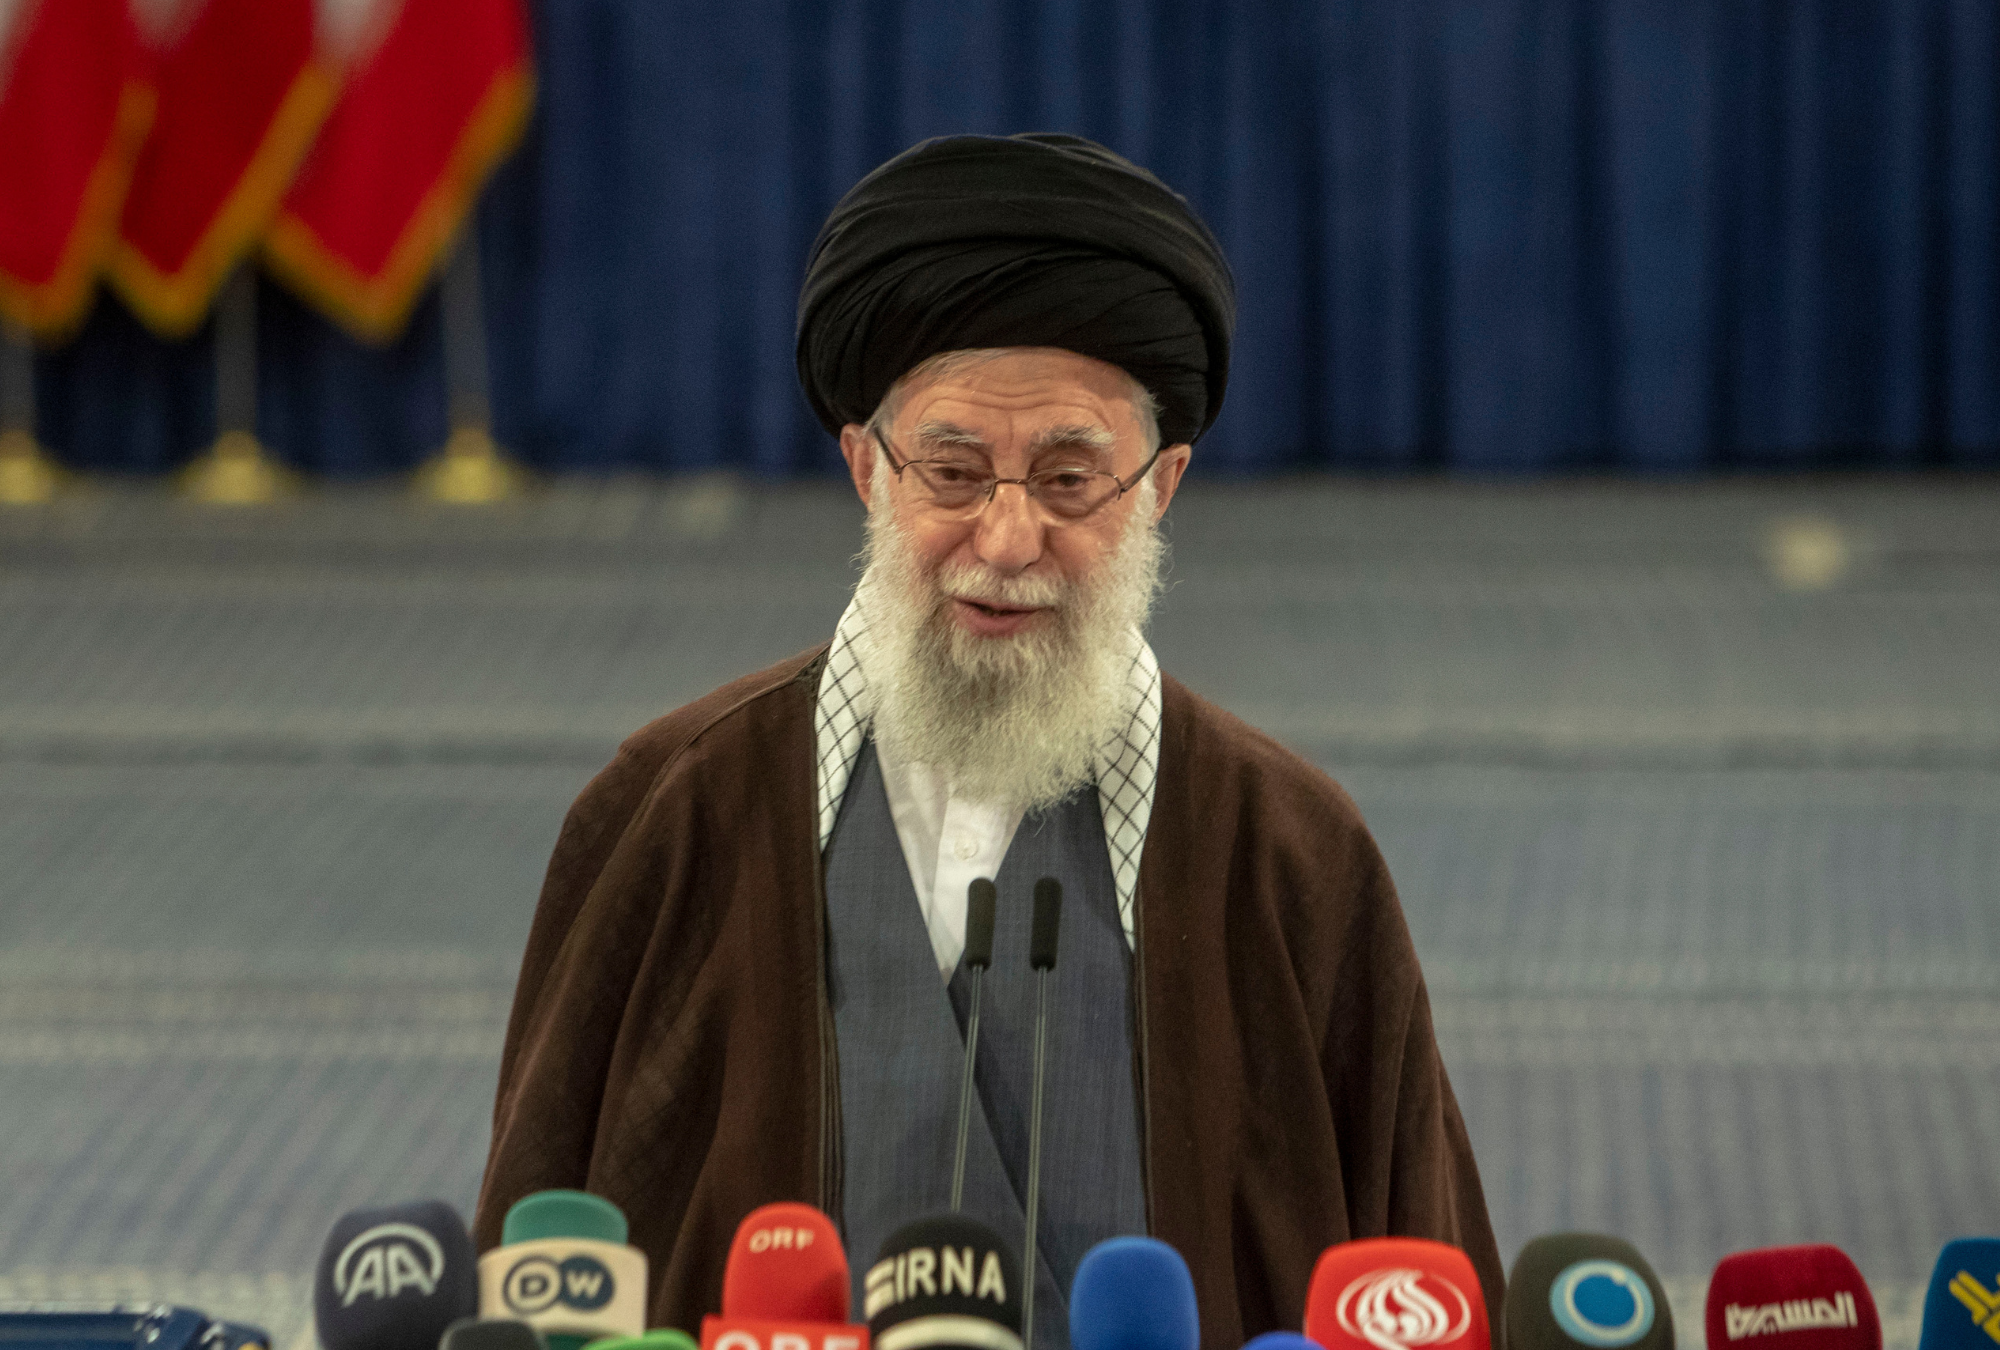 Ayatollah tells American college students they're on 'right side of history